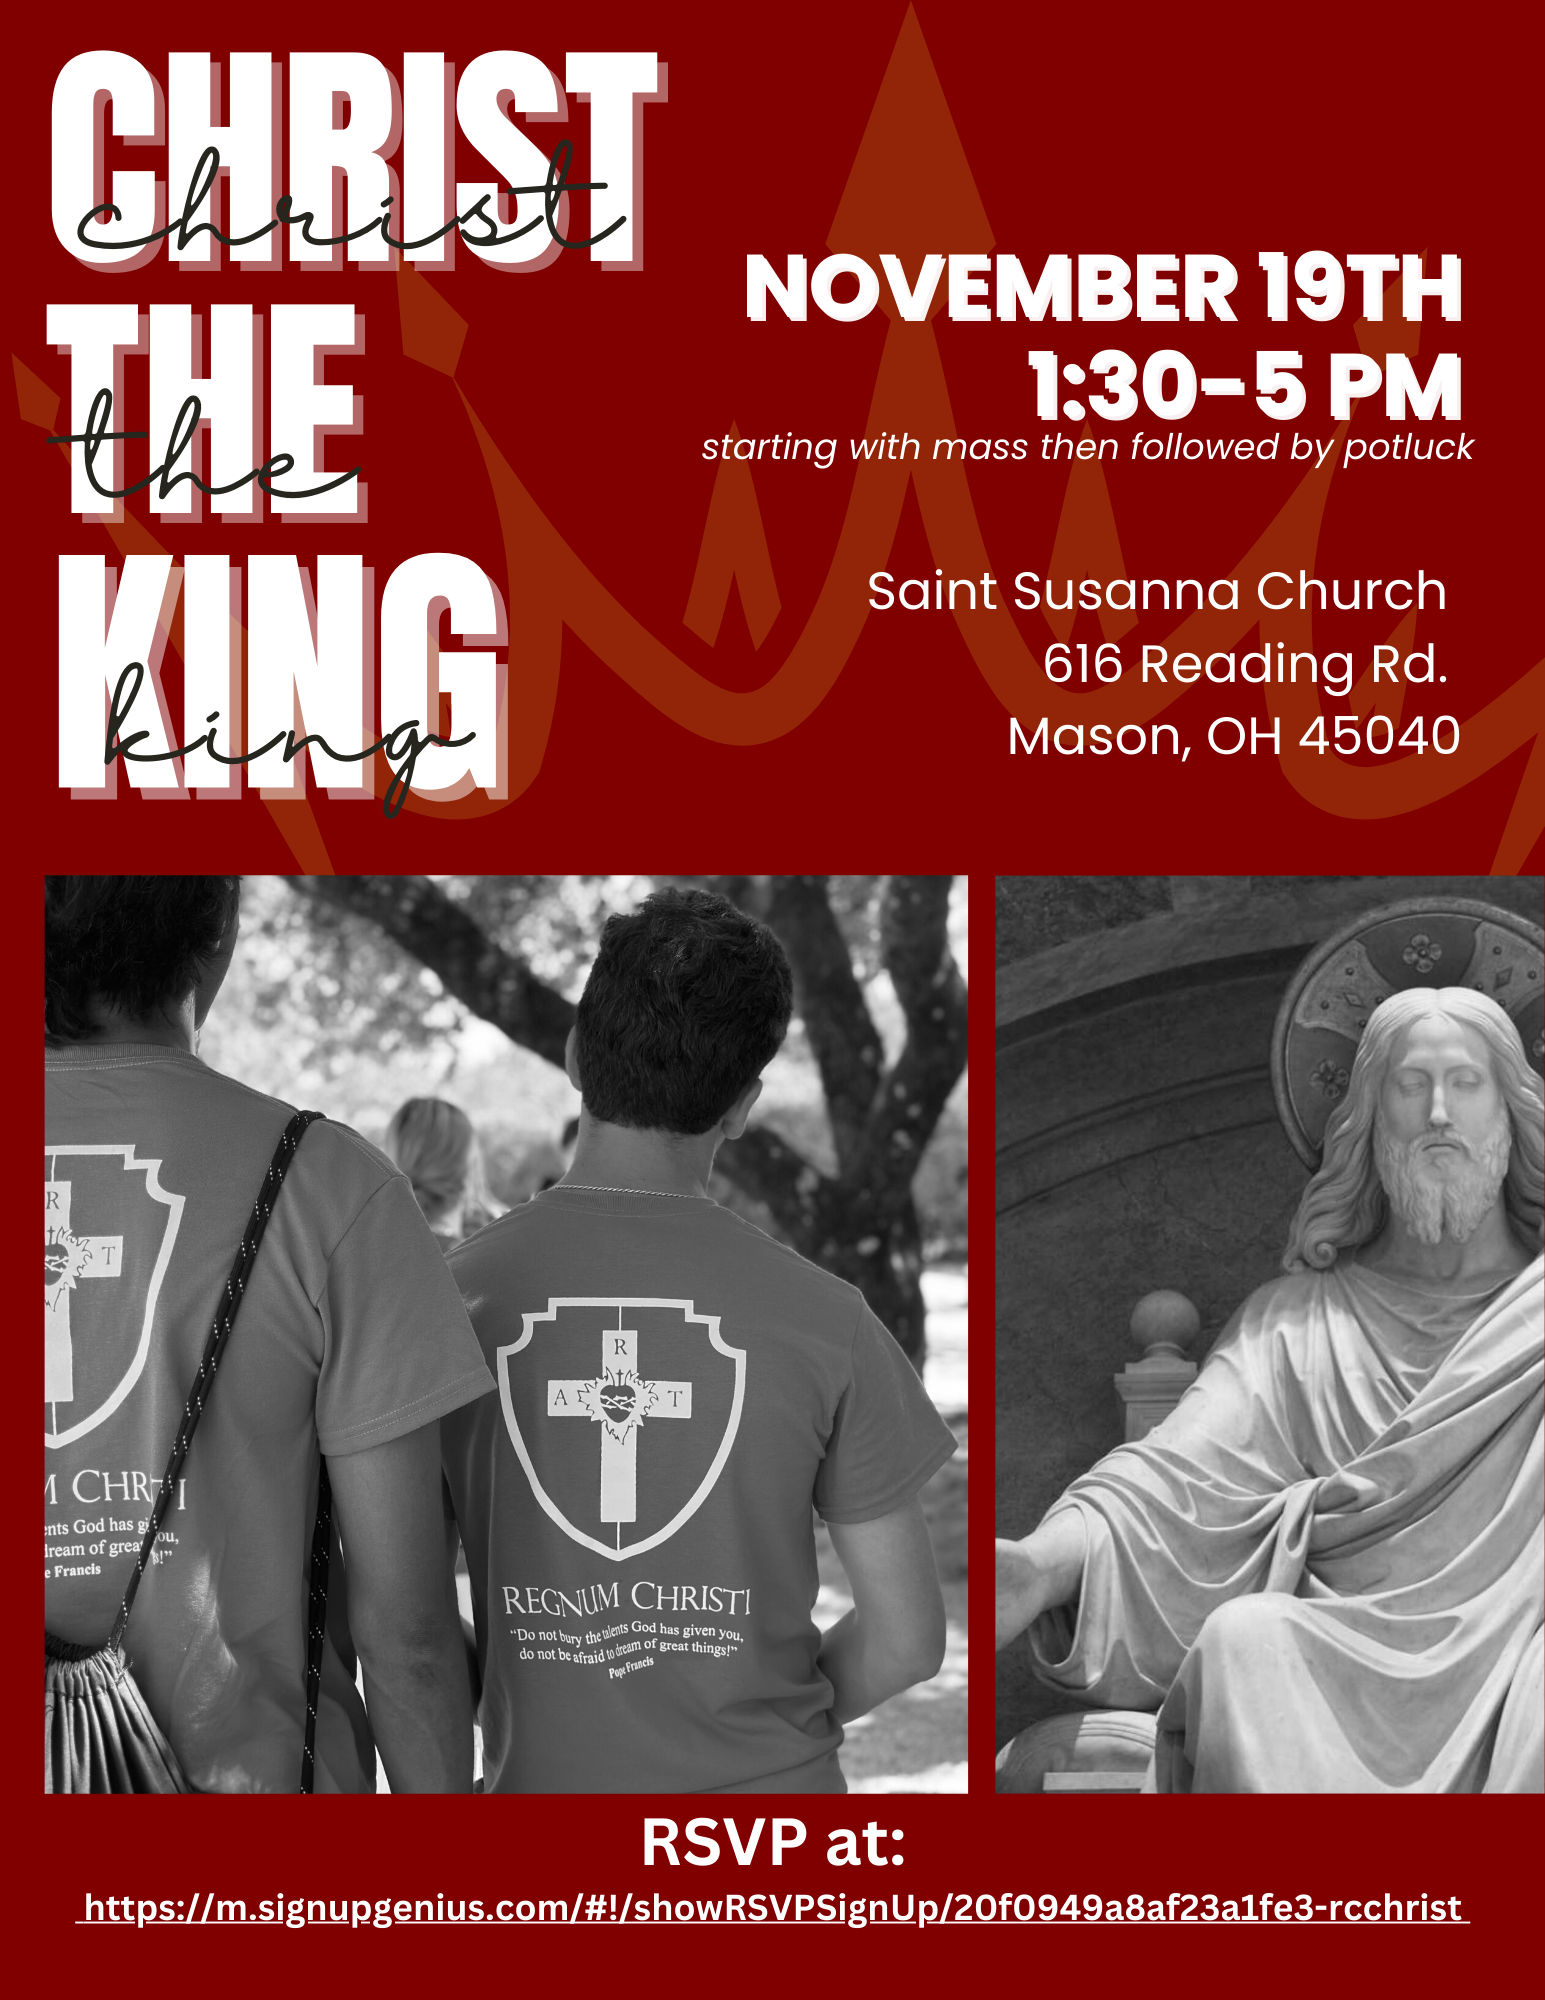 Novena to Christ the King Day 1  A Kingdom that is Not of This World -  Regnum Christi